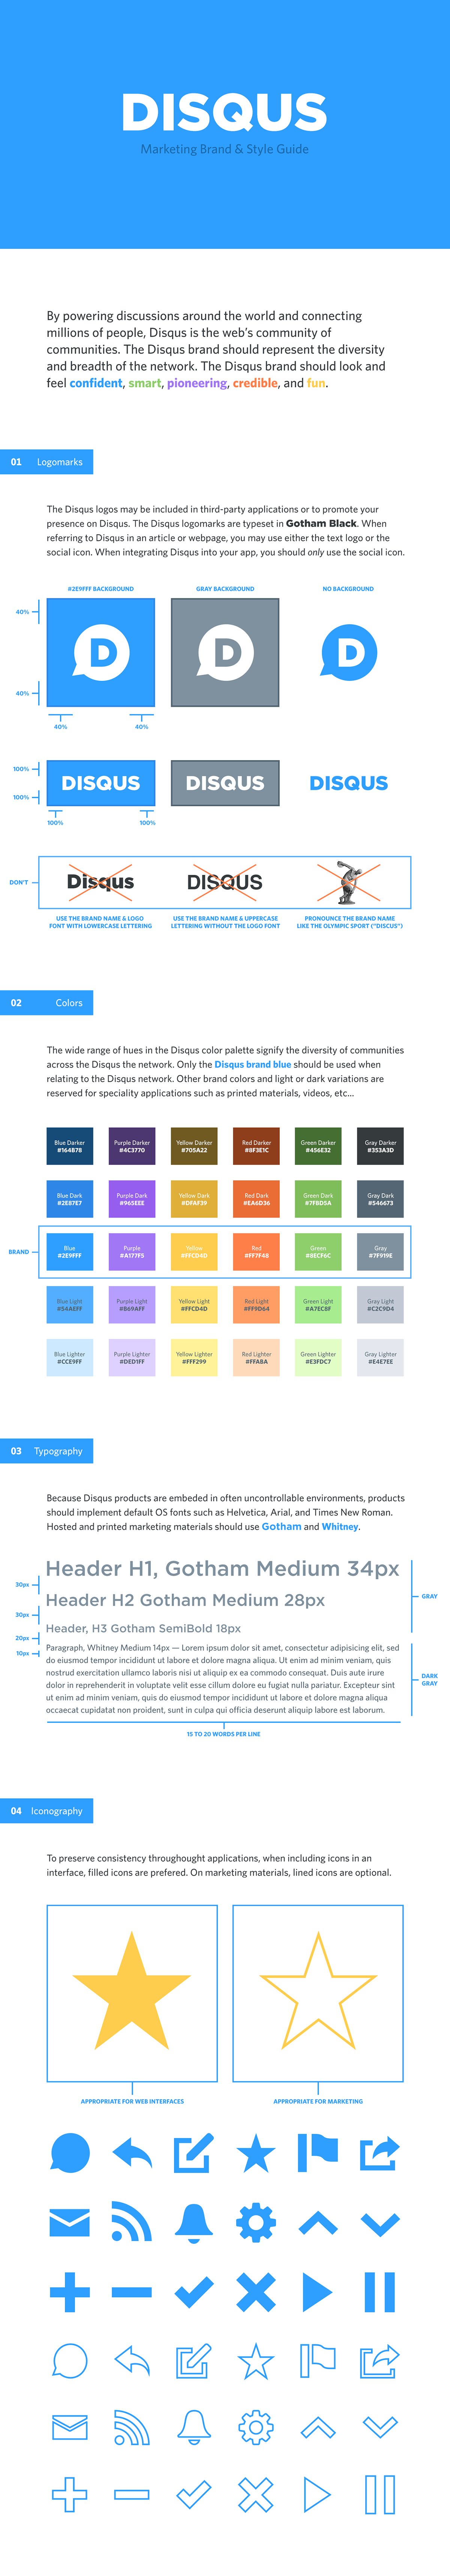 disqus Style Guide social colors brand guide type